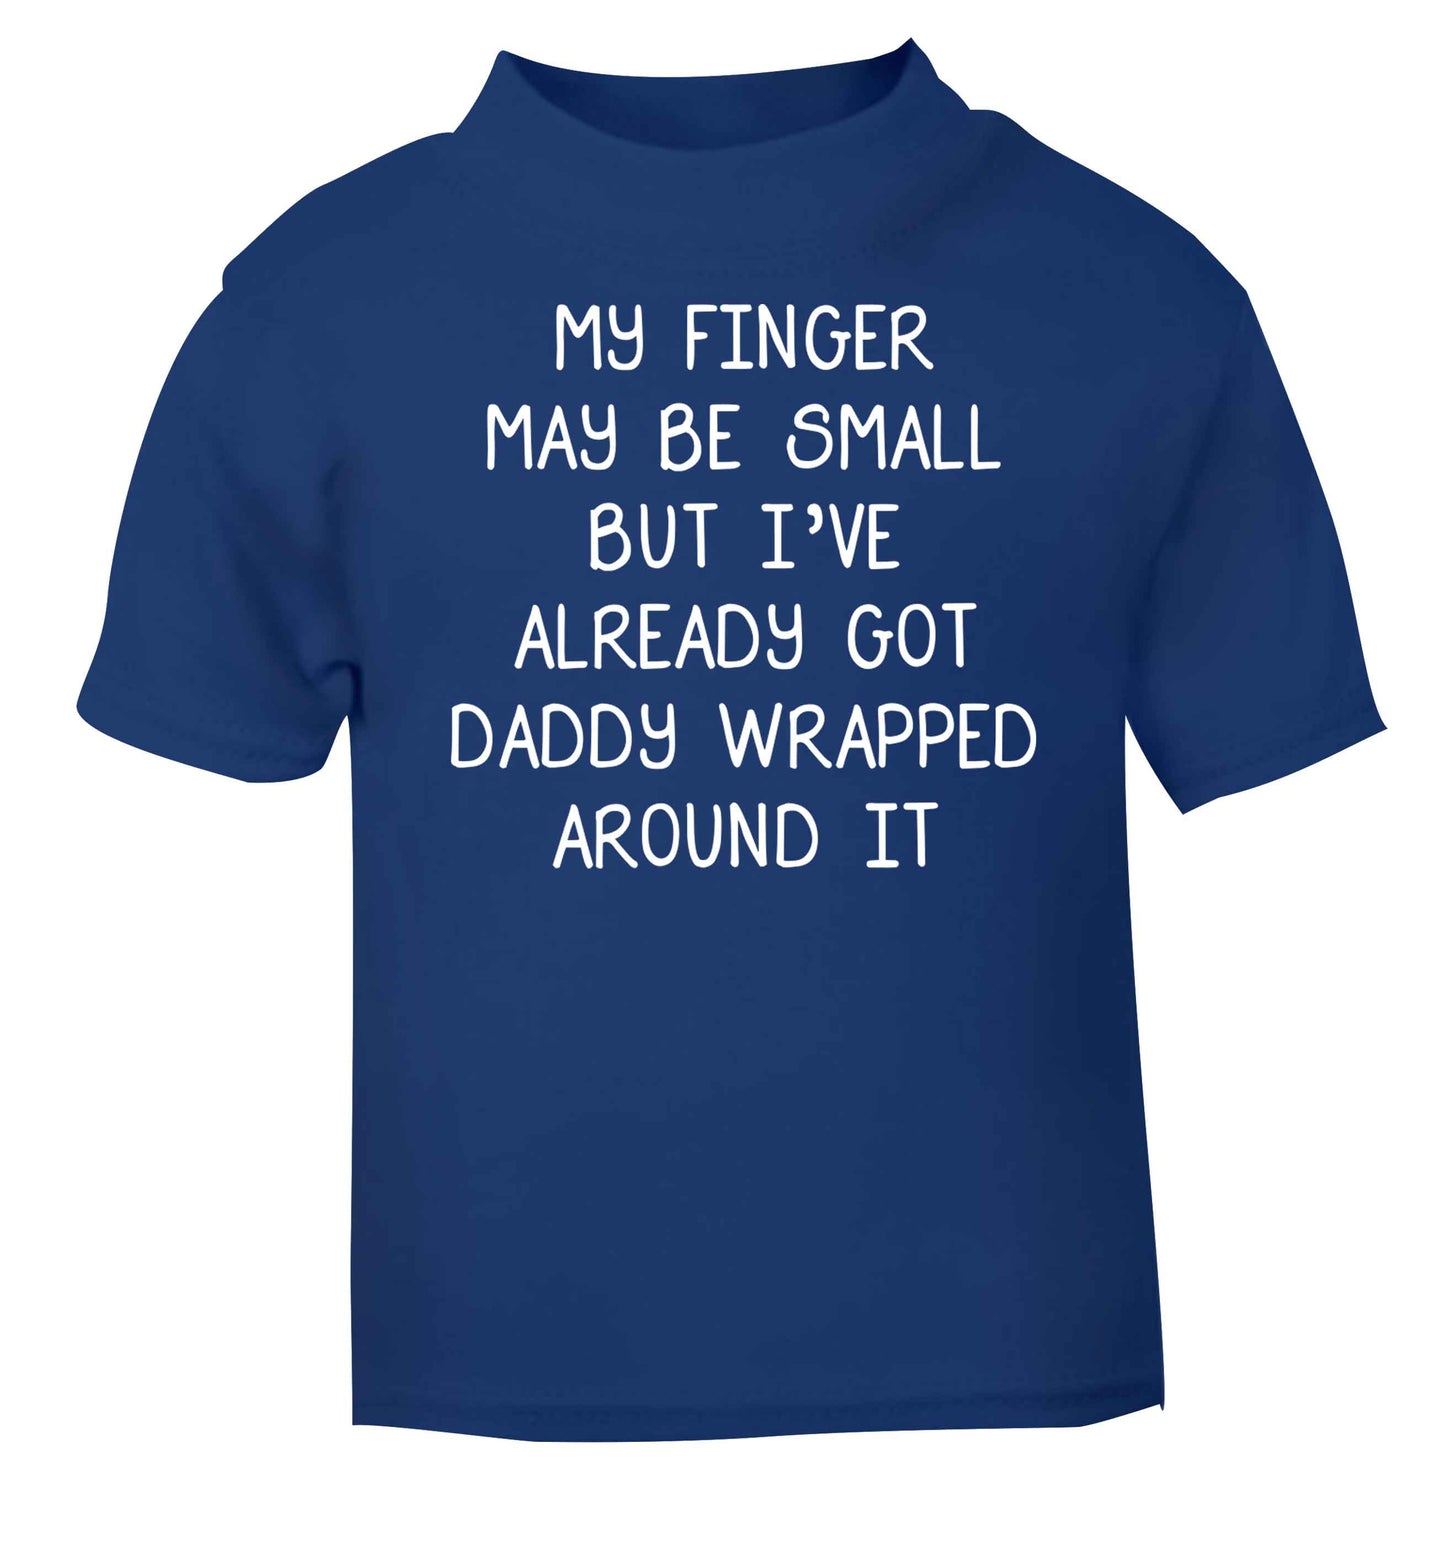 My finger may be small but I've already got daddy wrapped around it blue baby toddler Tshirt 2 Years